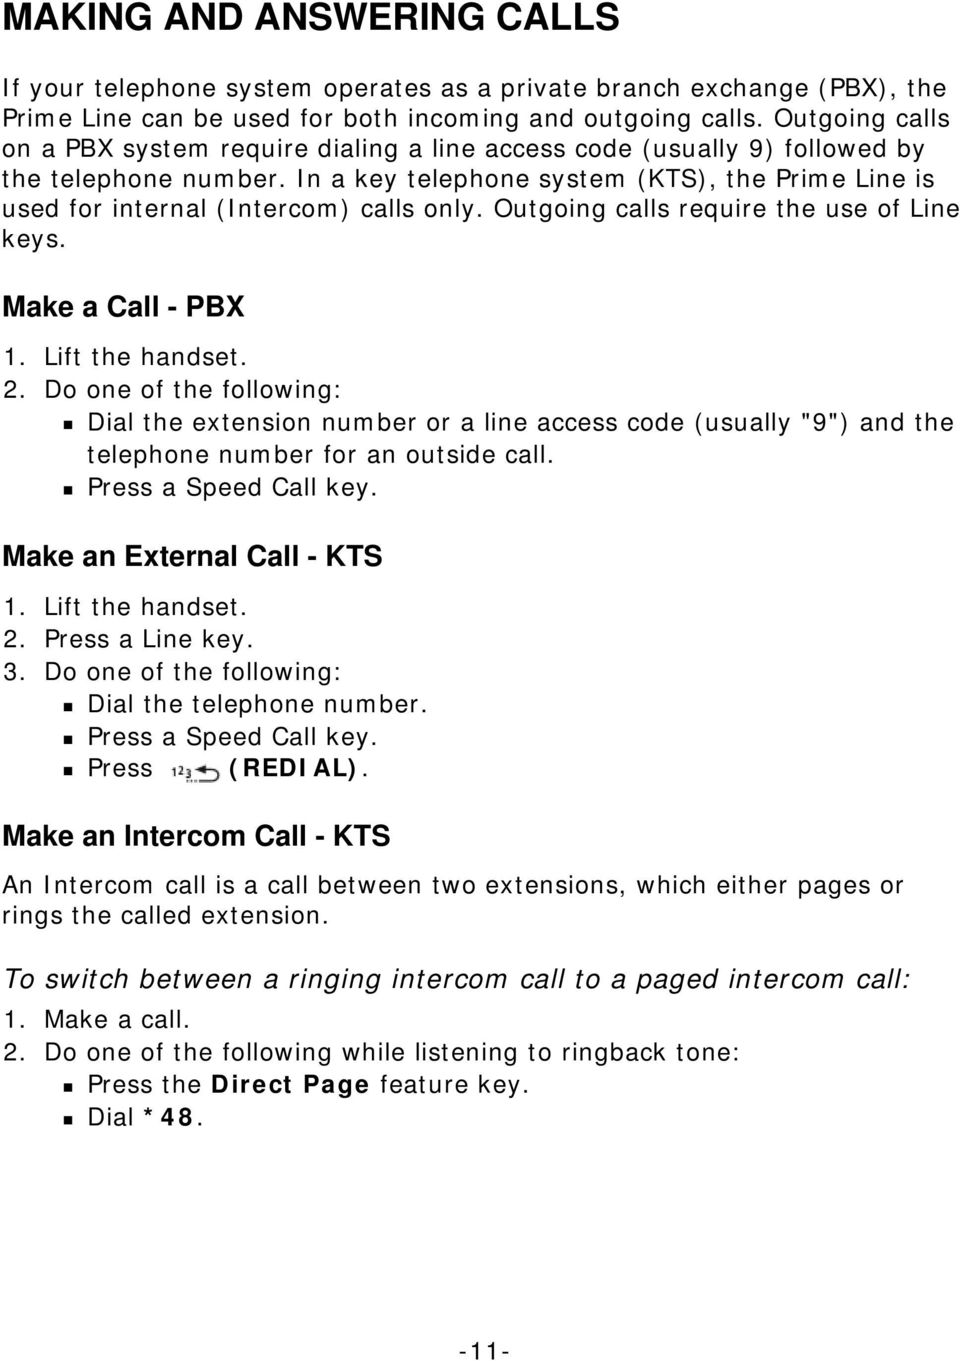 In a key telephone system (KTS), the Prime Line is used for internal (Intercom) calls only. Outgoing calls require the use of Line keys. Make a Call - PBX 1. Lift the handset. 2.